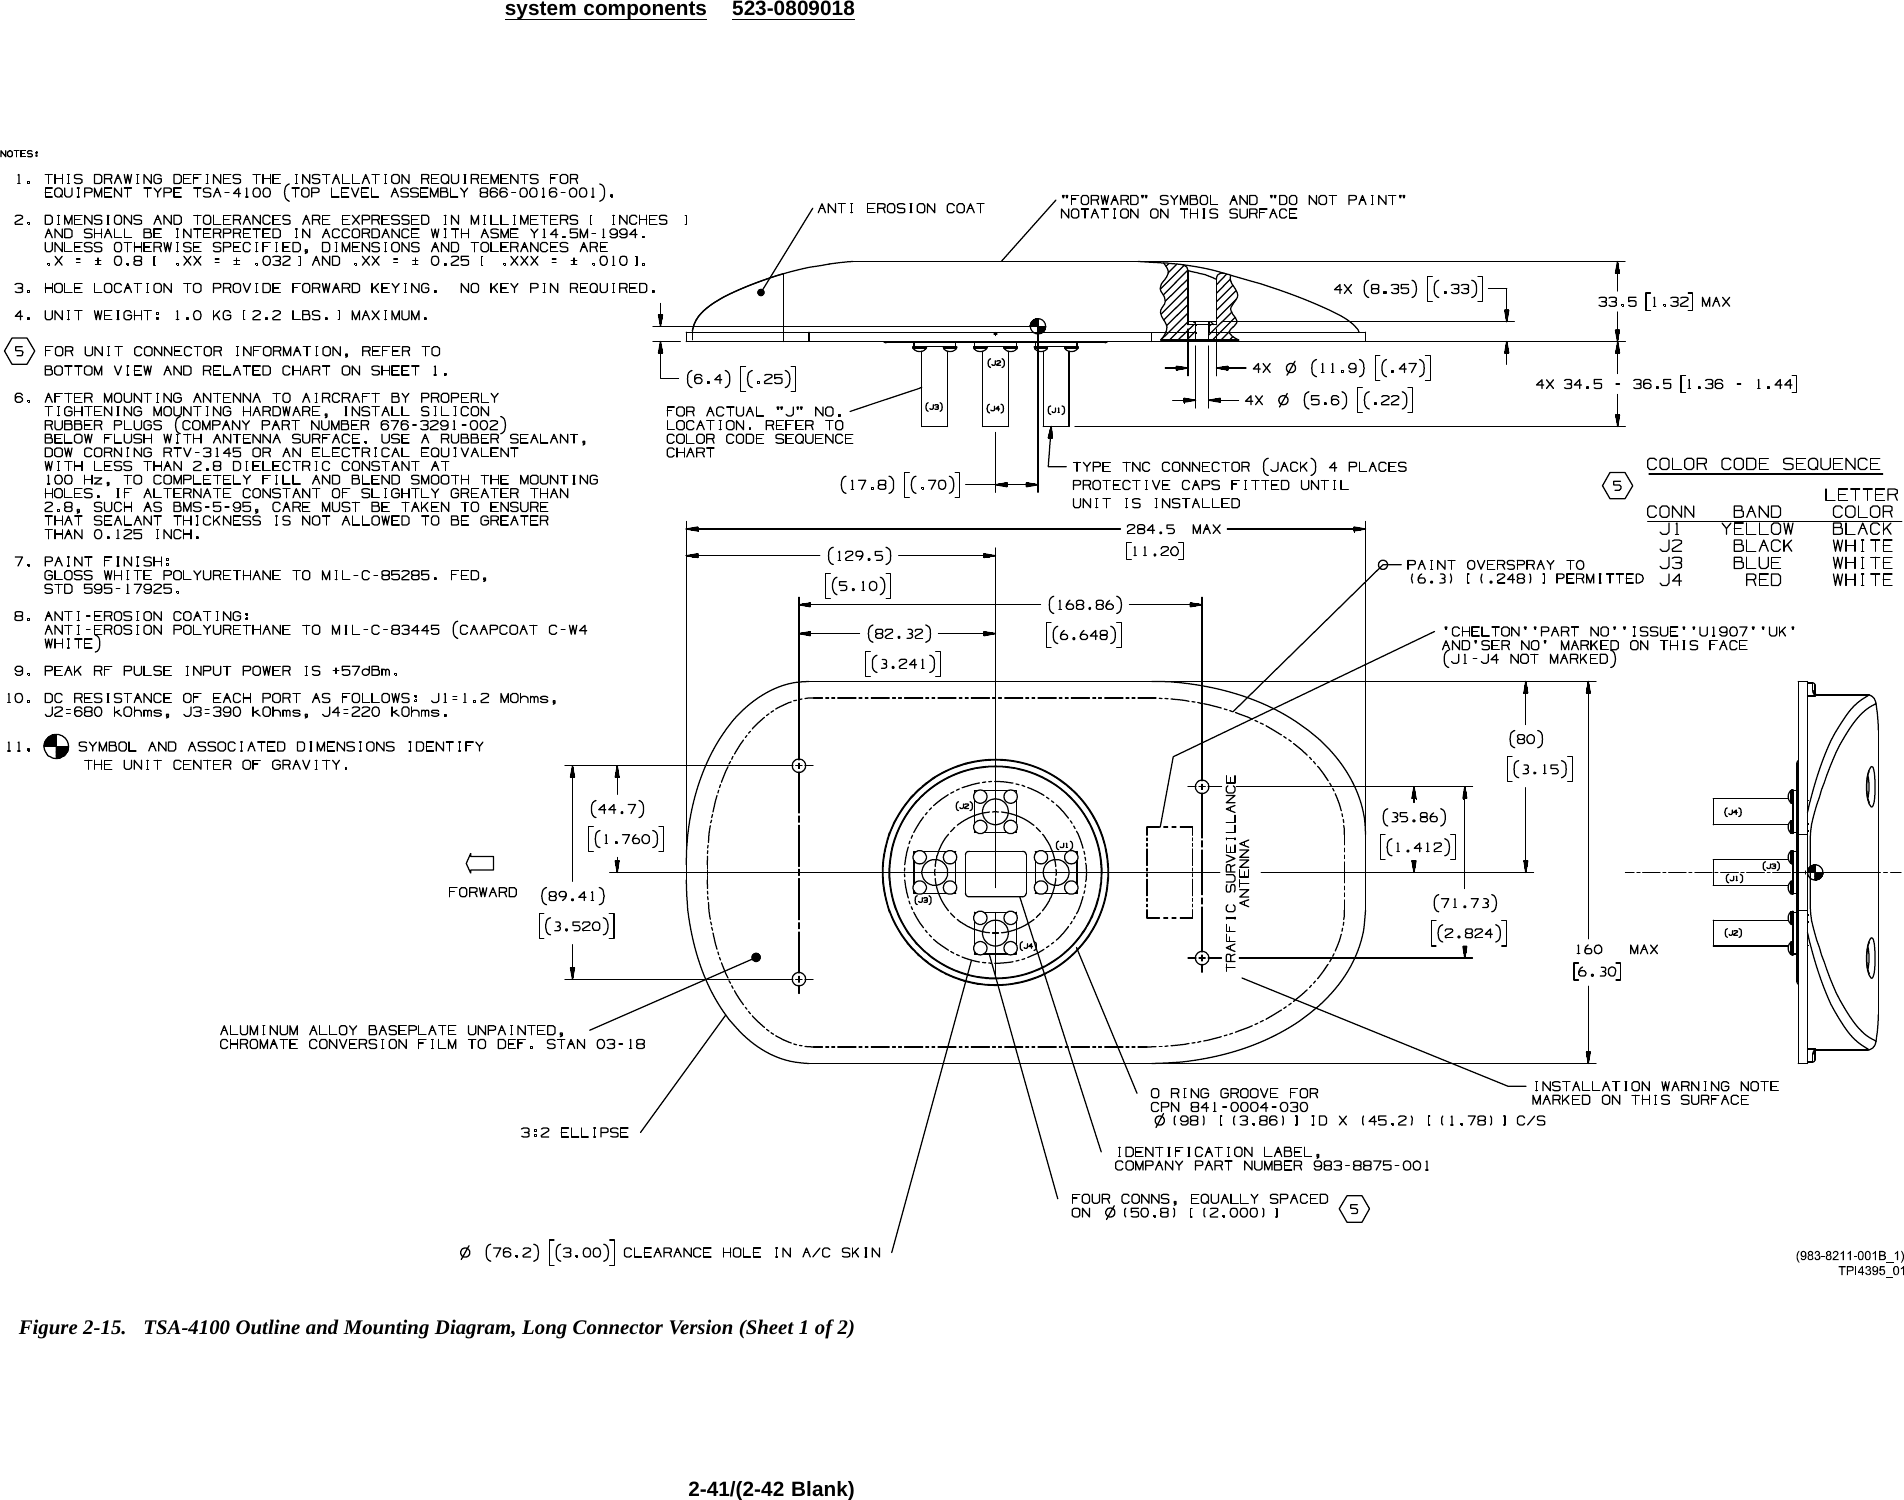 system components 523-0809018Figure 2-15. TSA-4100 Outline and Mounting Diagram, Long Connector Version (Sheet 1 of 2)2-41/(2-42 Blank)